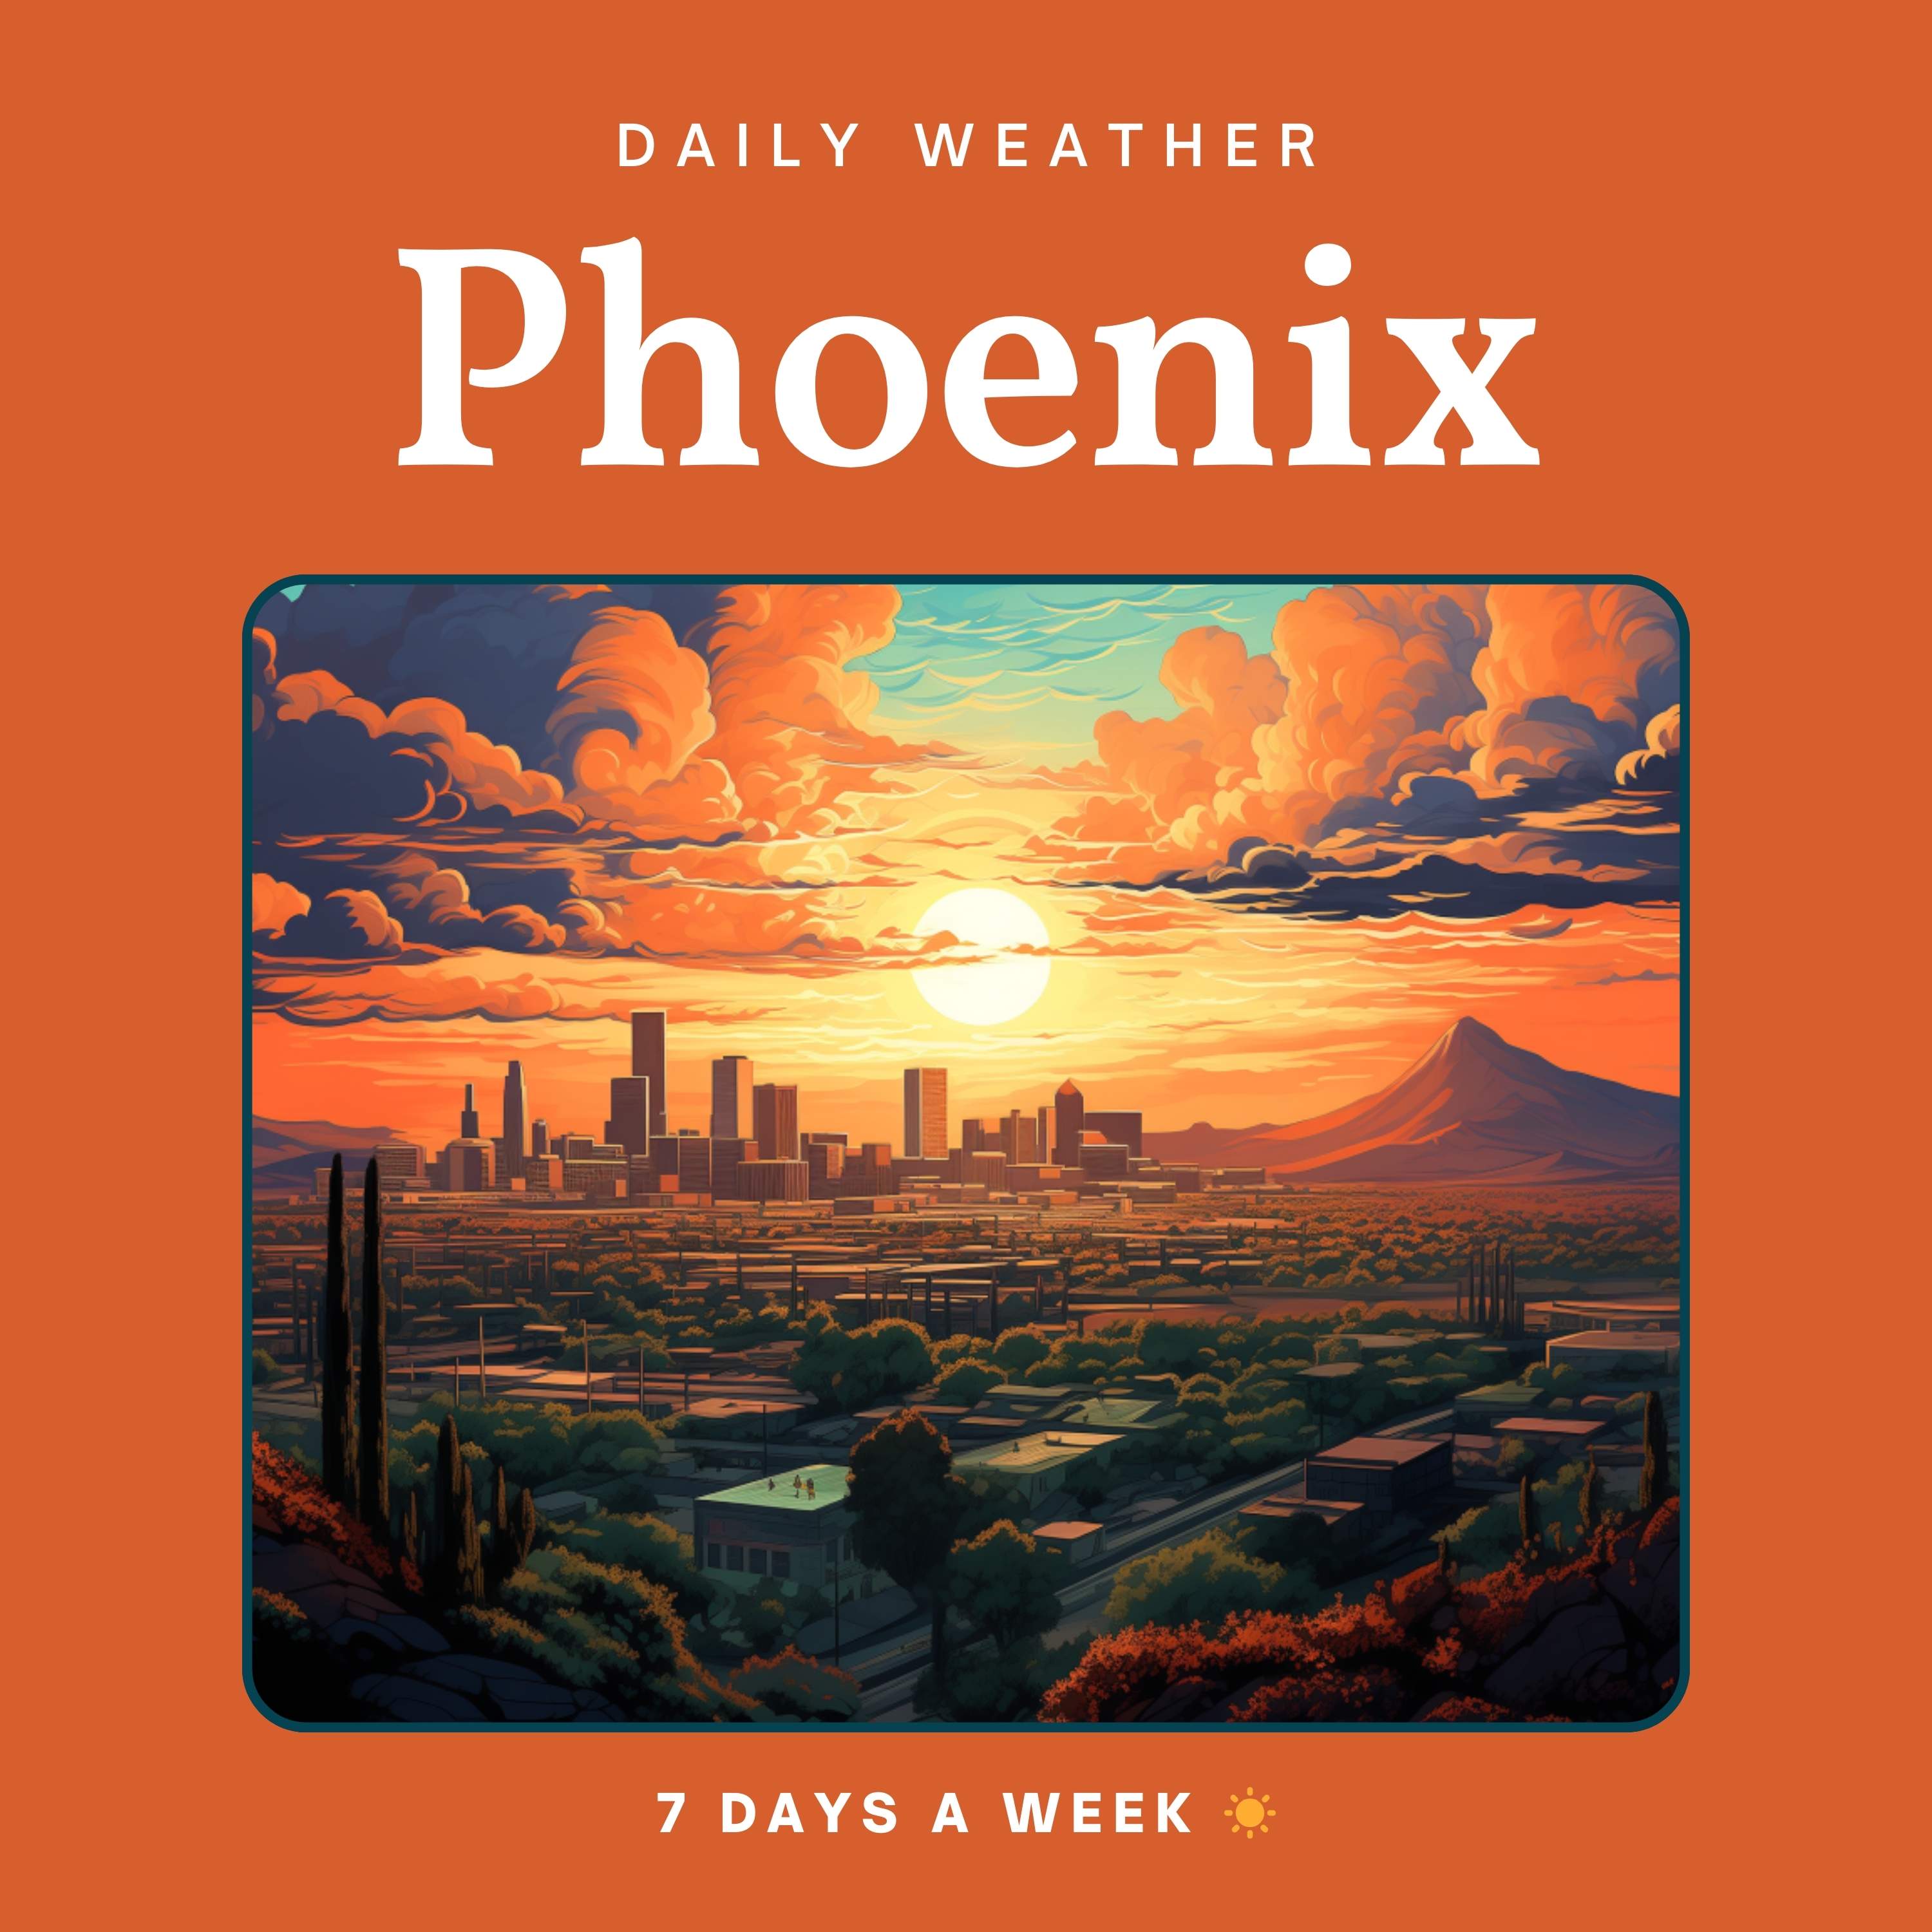 Artwork for Phoenix Weather Daily